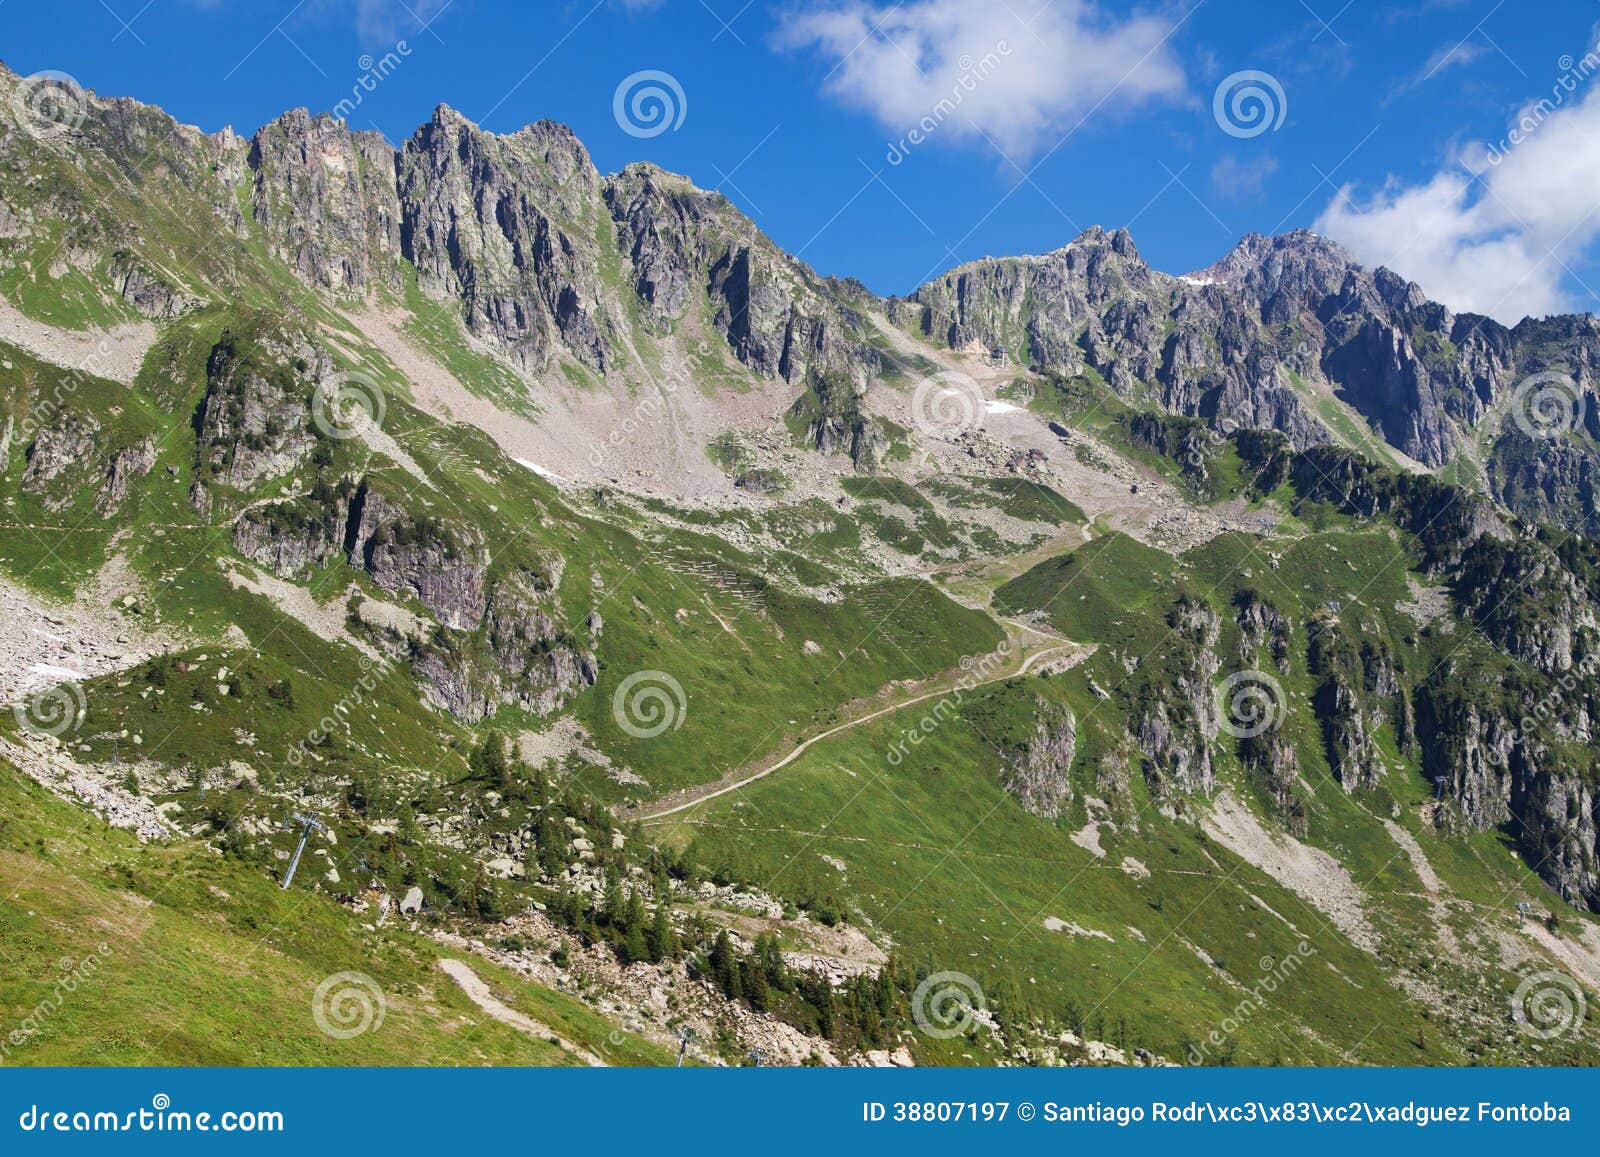 Aiguilles Rouges National Nature Reserve Stock Image - Image of ...